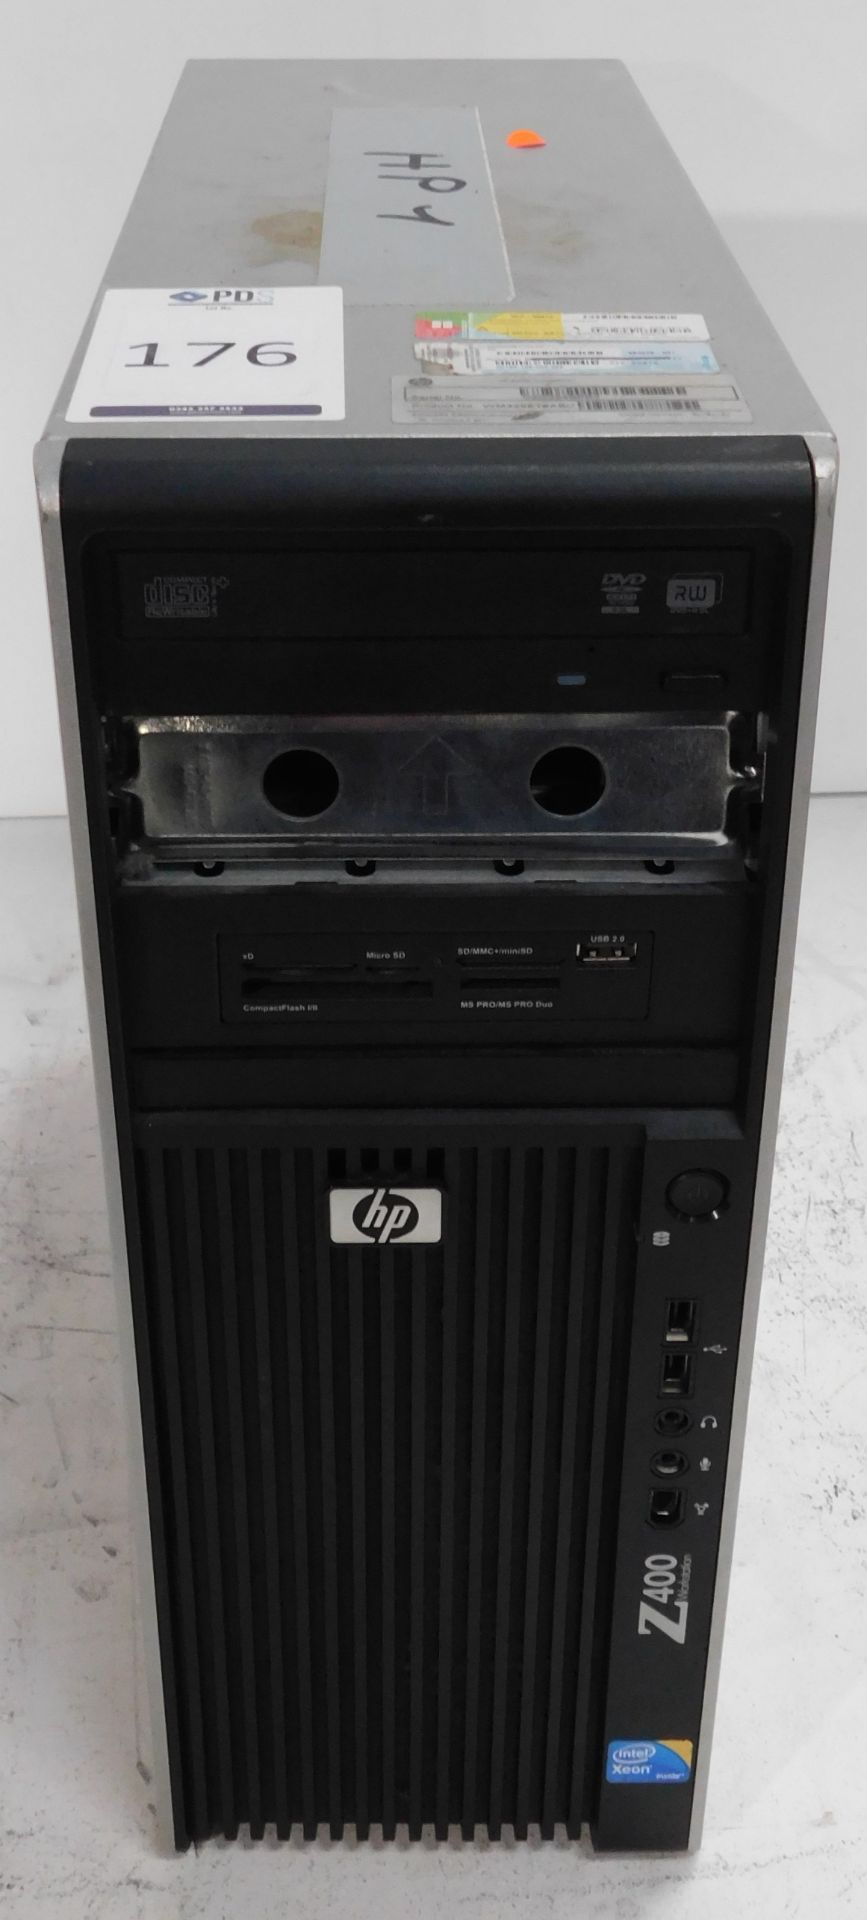 Two HP Z400 Workstation Desktop Computers (No HDDs) (Location Brentwood. Please Refer to General